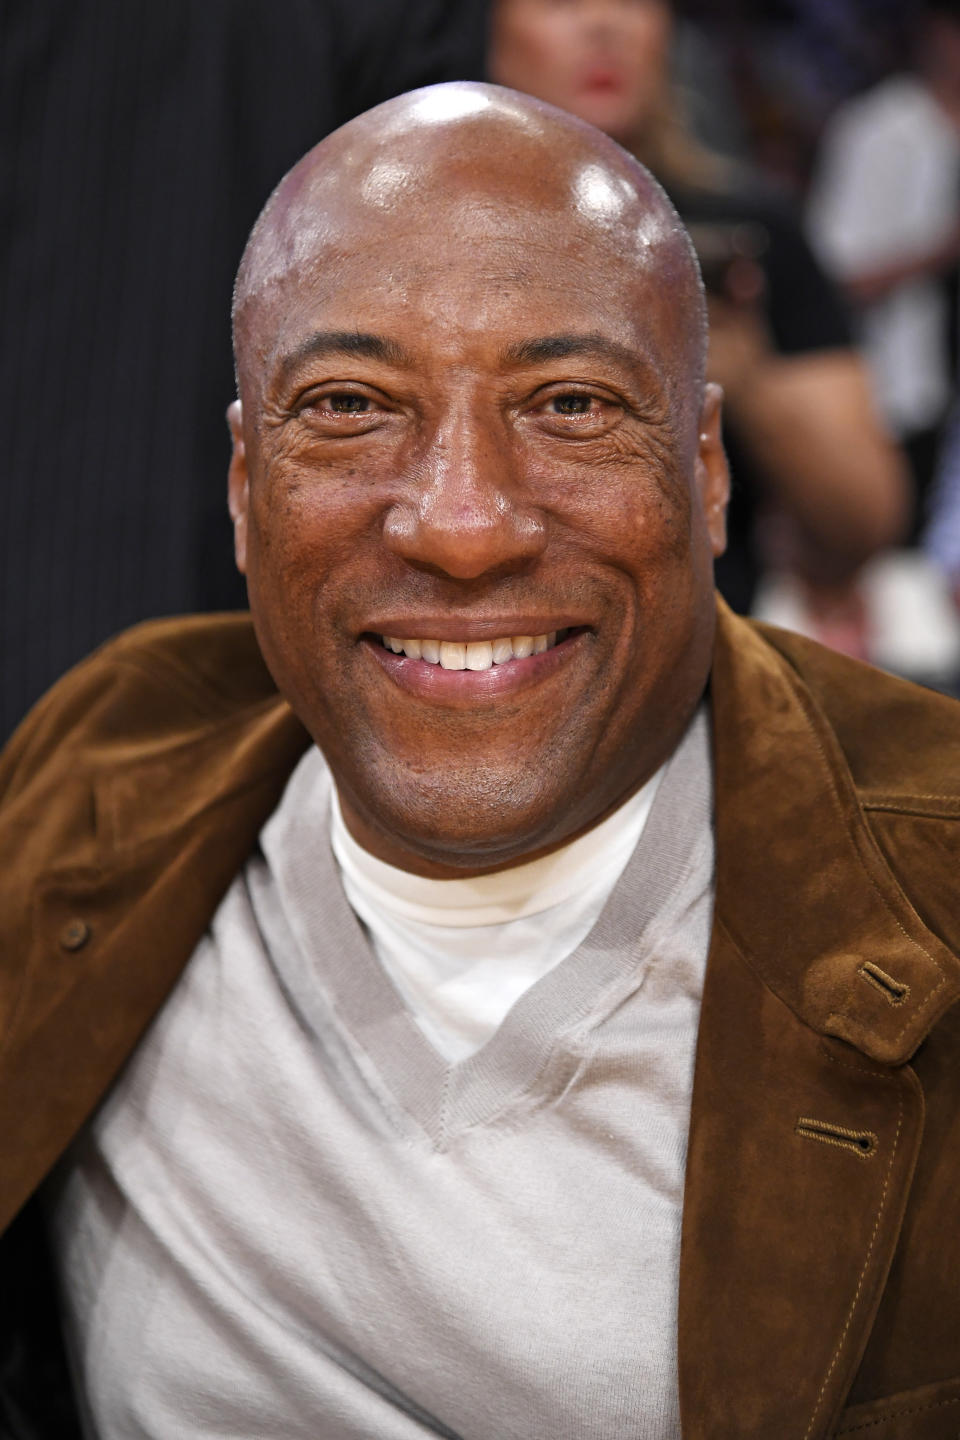 Byron Allen attends game three of the Western Conference Finals between the Los Angeles Lakers and the Denver Nuggets at Crypto.com Arena on May 20, 2023 in Los Angeles, California. NOTE TO USER: User expressly acknowledges and agrees that, by downloading and or using this photograph, User is consenting to the terms and conditions of the Getty Images License Agreement.